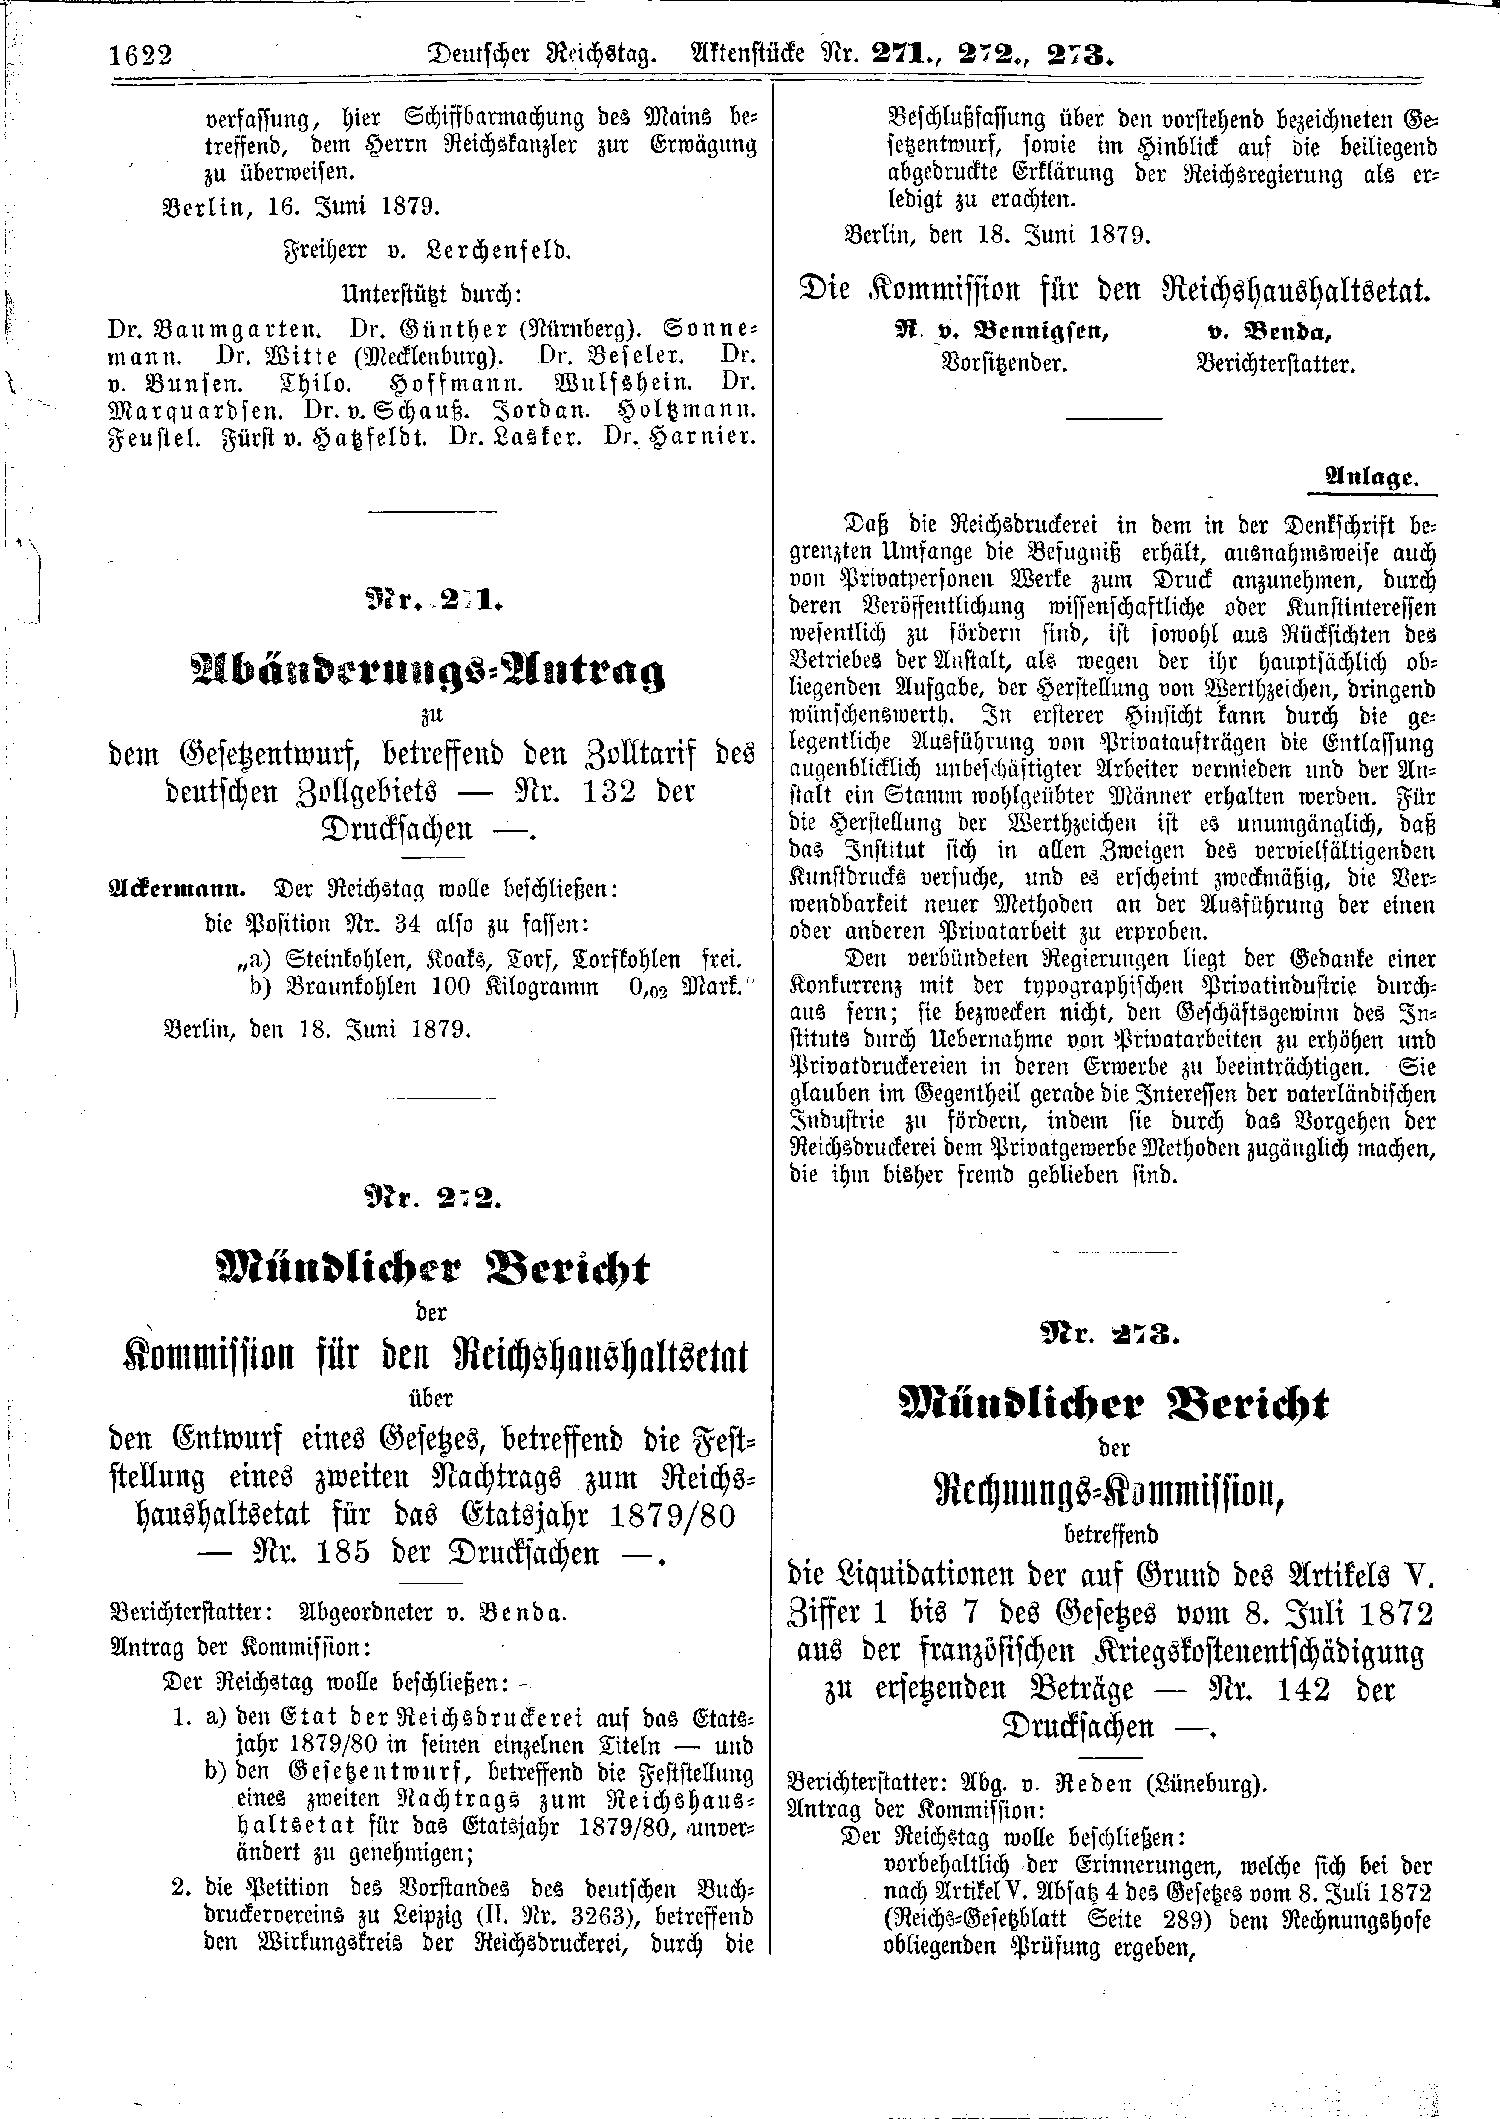 Scan of page 1622